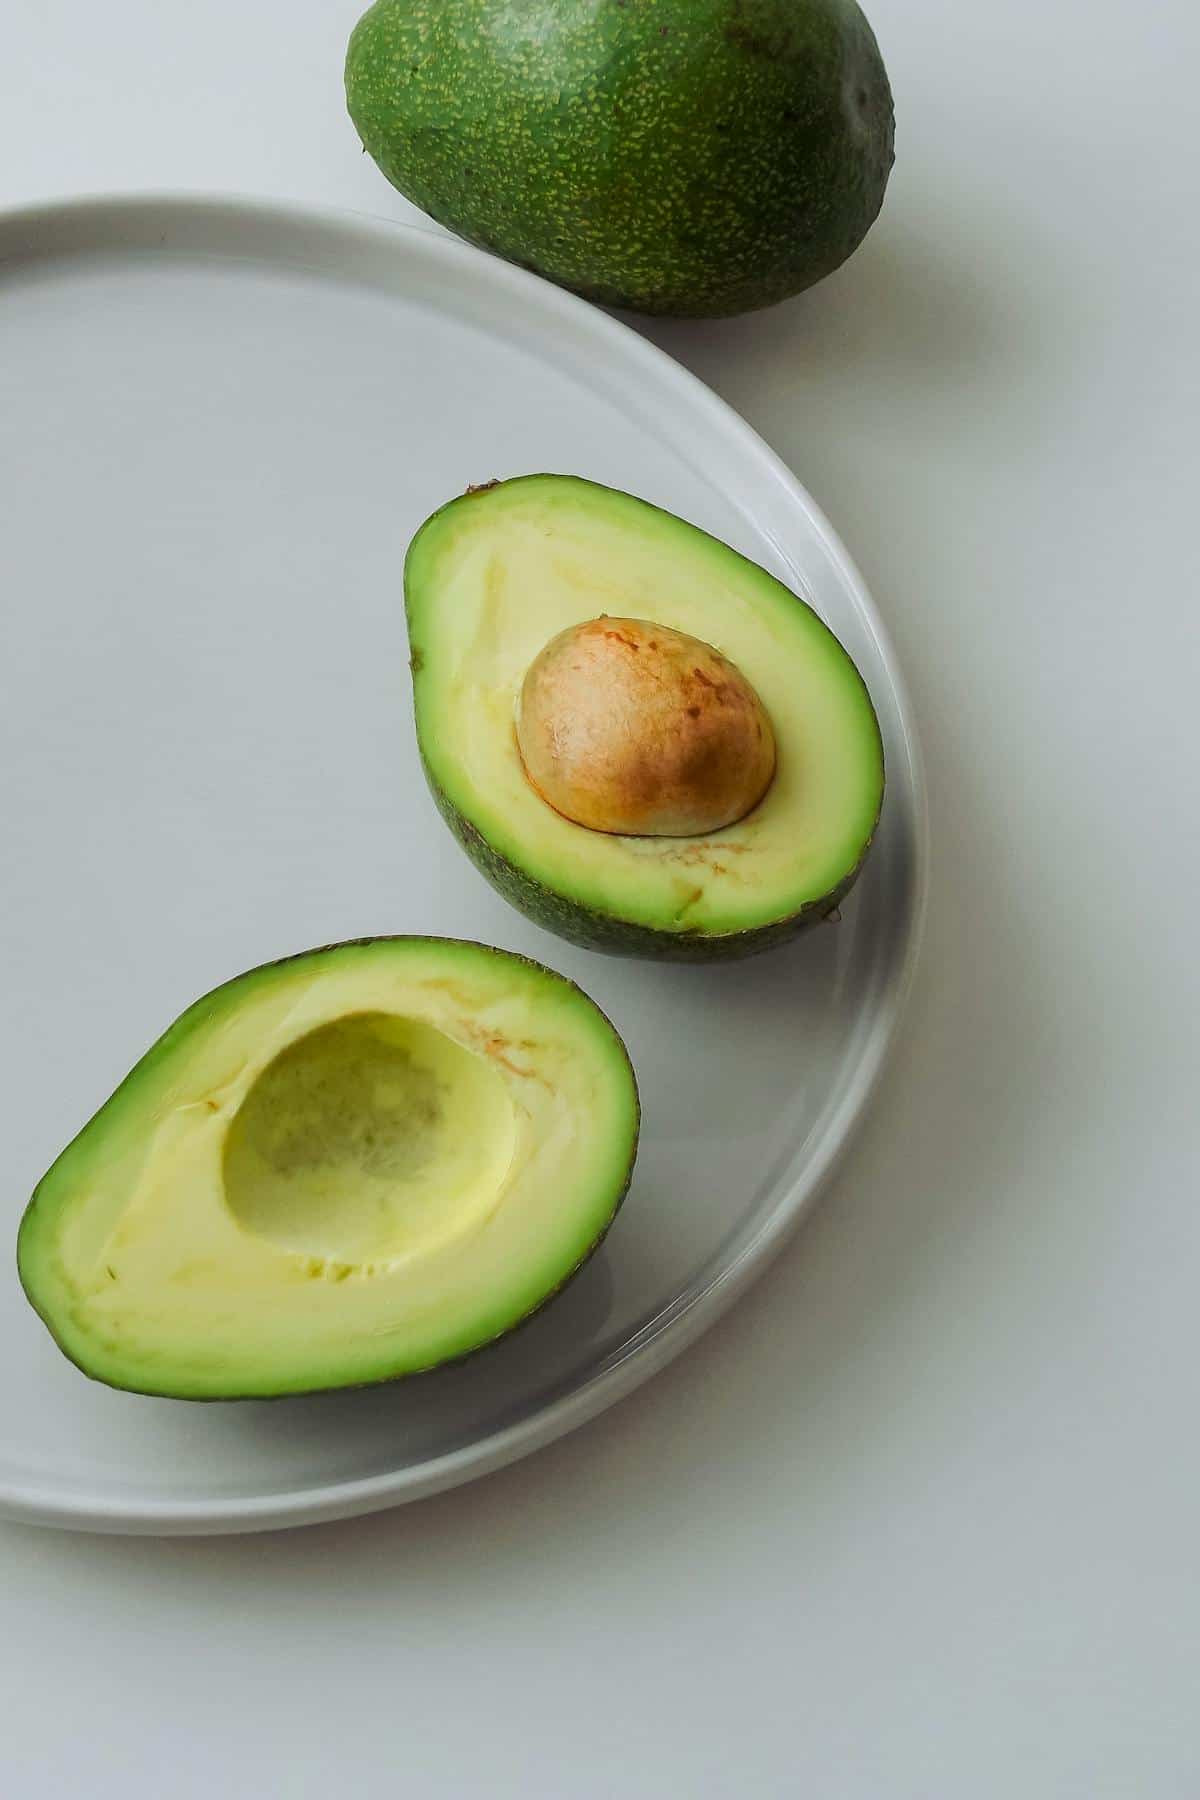 A halved avocado with its stone on a white plate, with a whole avocado in the background.